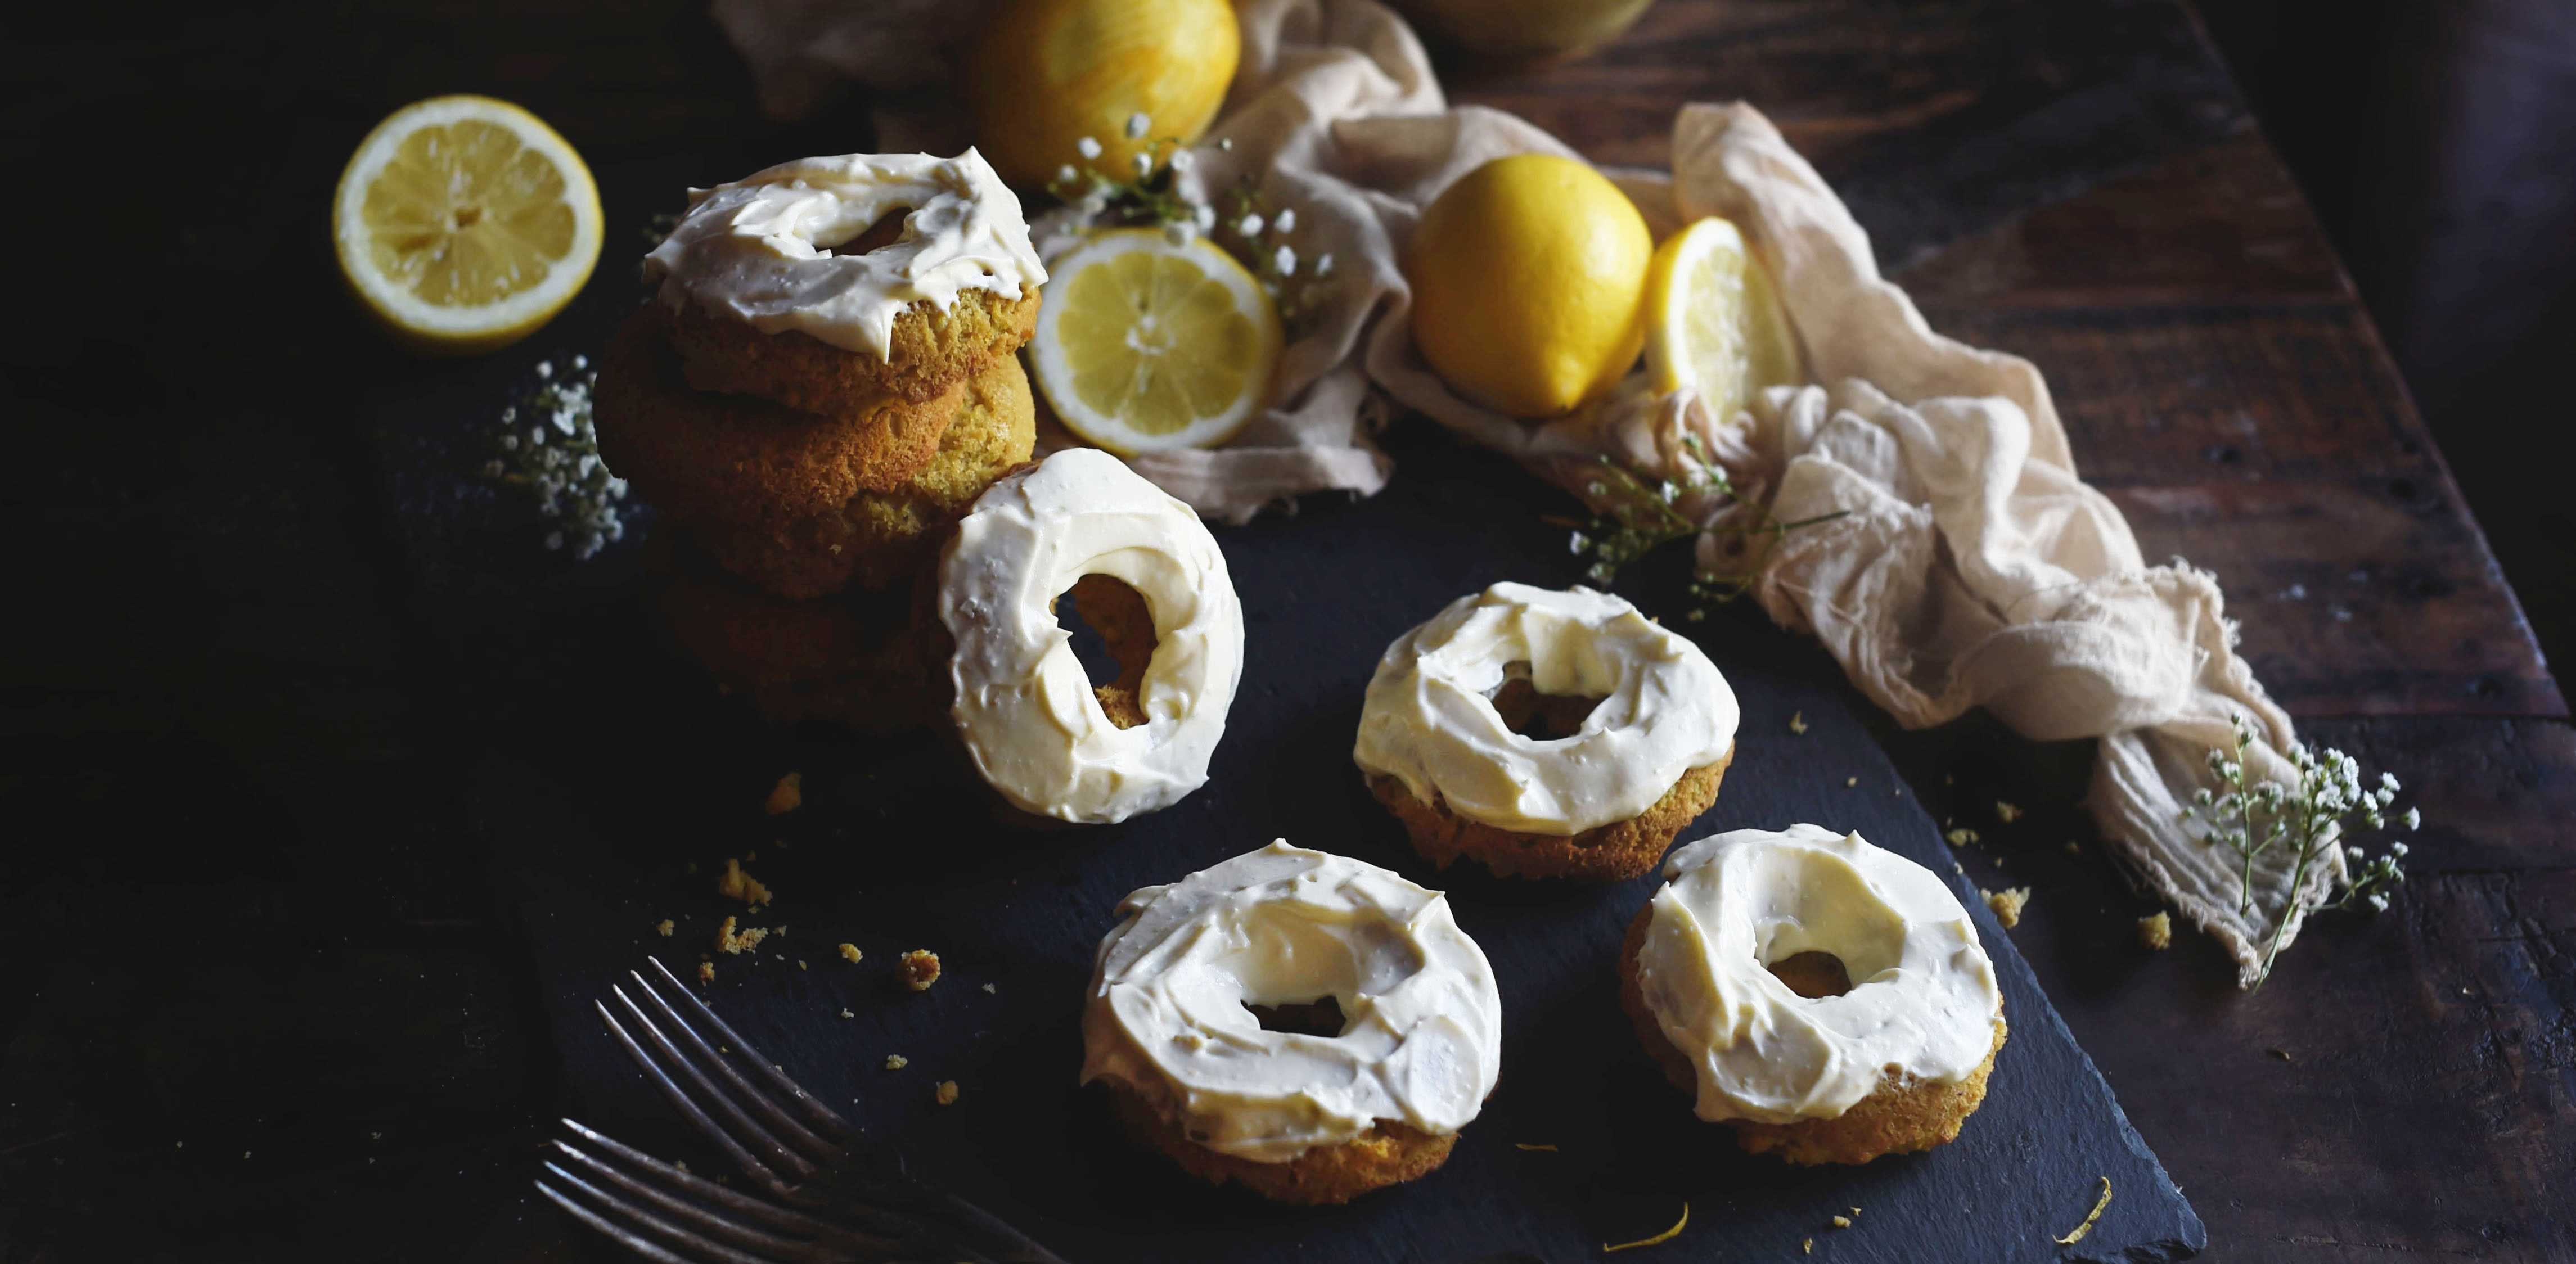 Low-Carb Lemon Donuts with Cheesecake Frosting